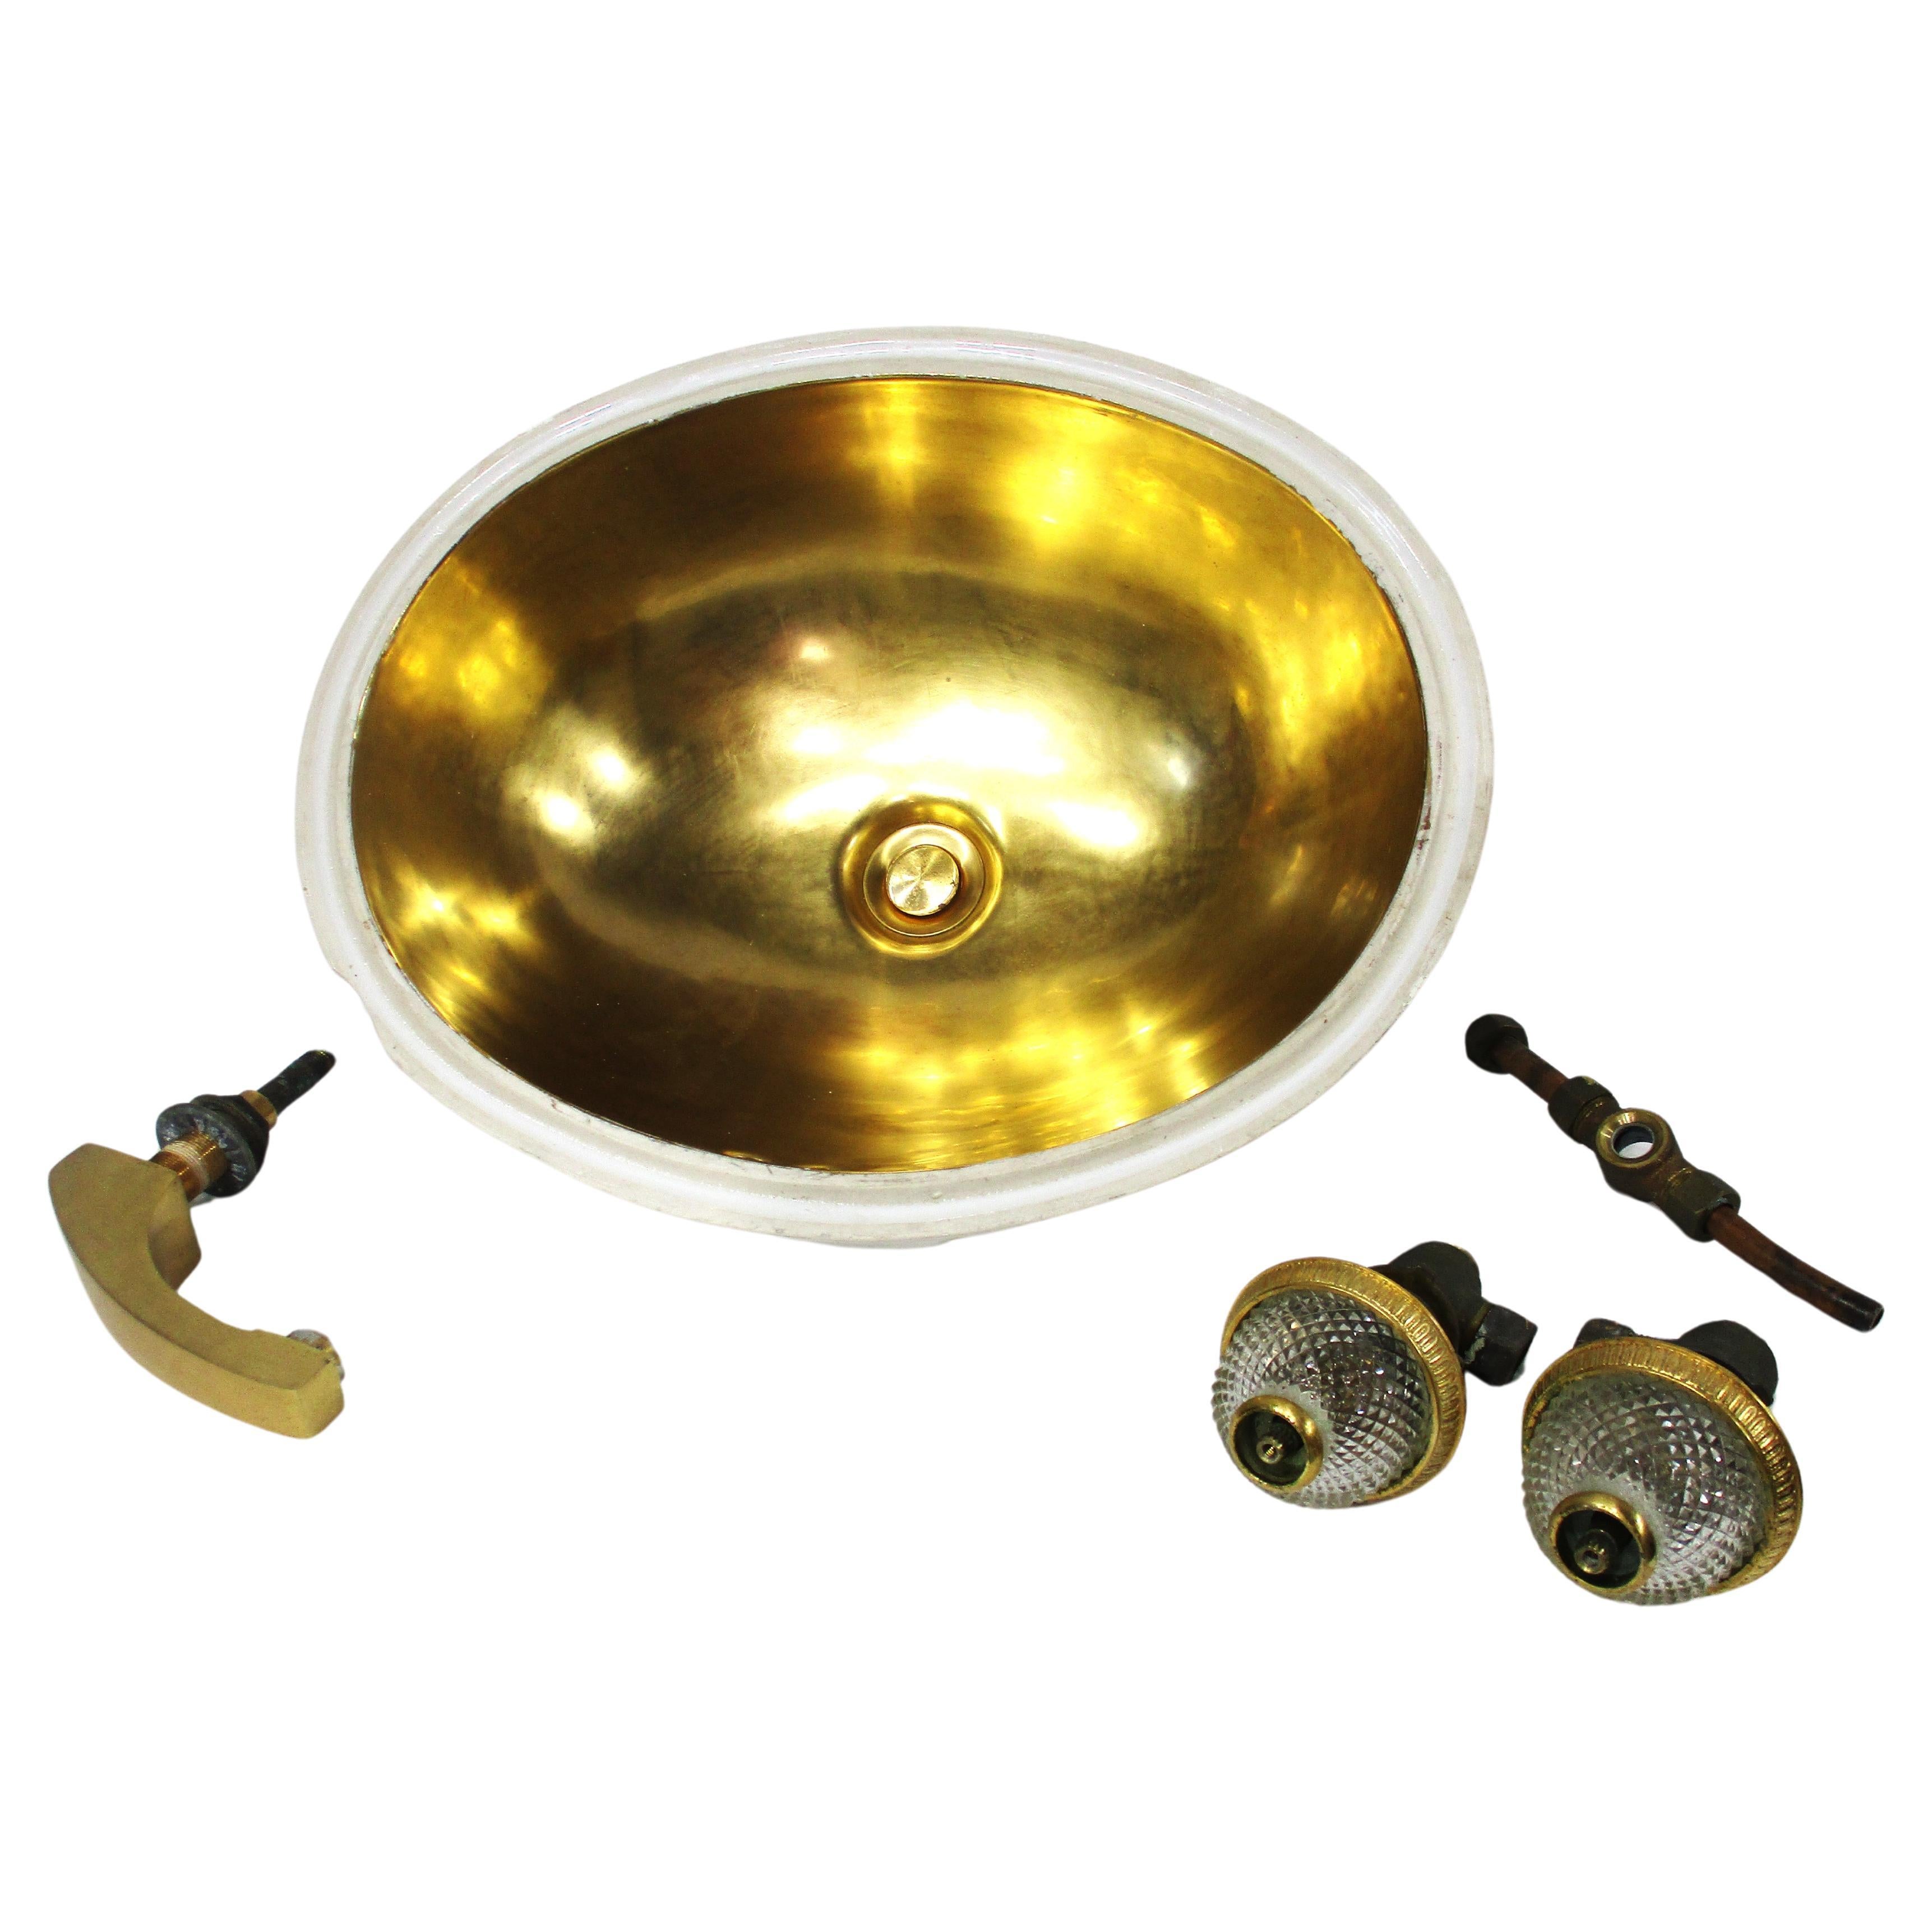 Sherle Wagner Attributed Vintage Bathroom Sink and Fixtures   